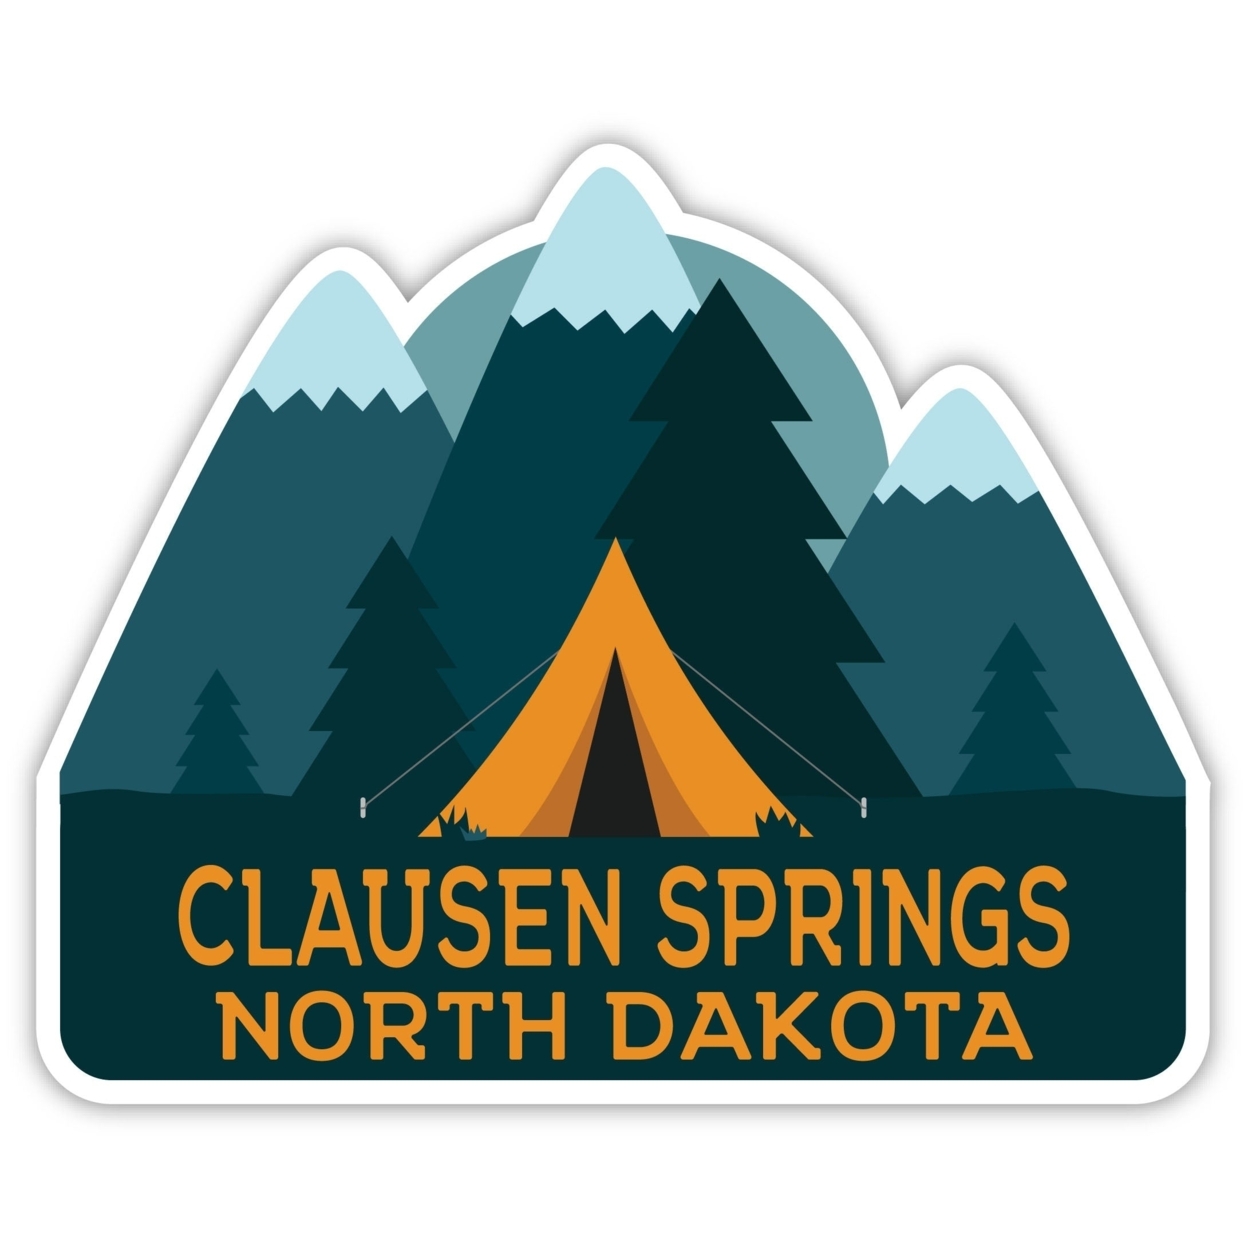 Clausen Springs North Dakota Souvenir Decorative Stickers (Choose Theme And Size) - 4-Pack, 4-Inch, Tent